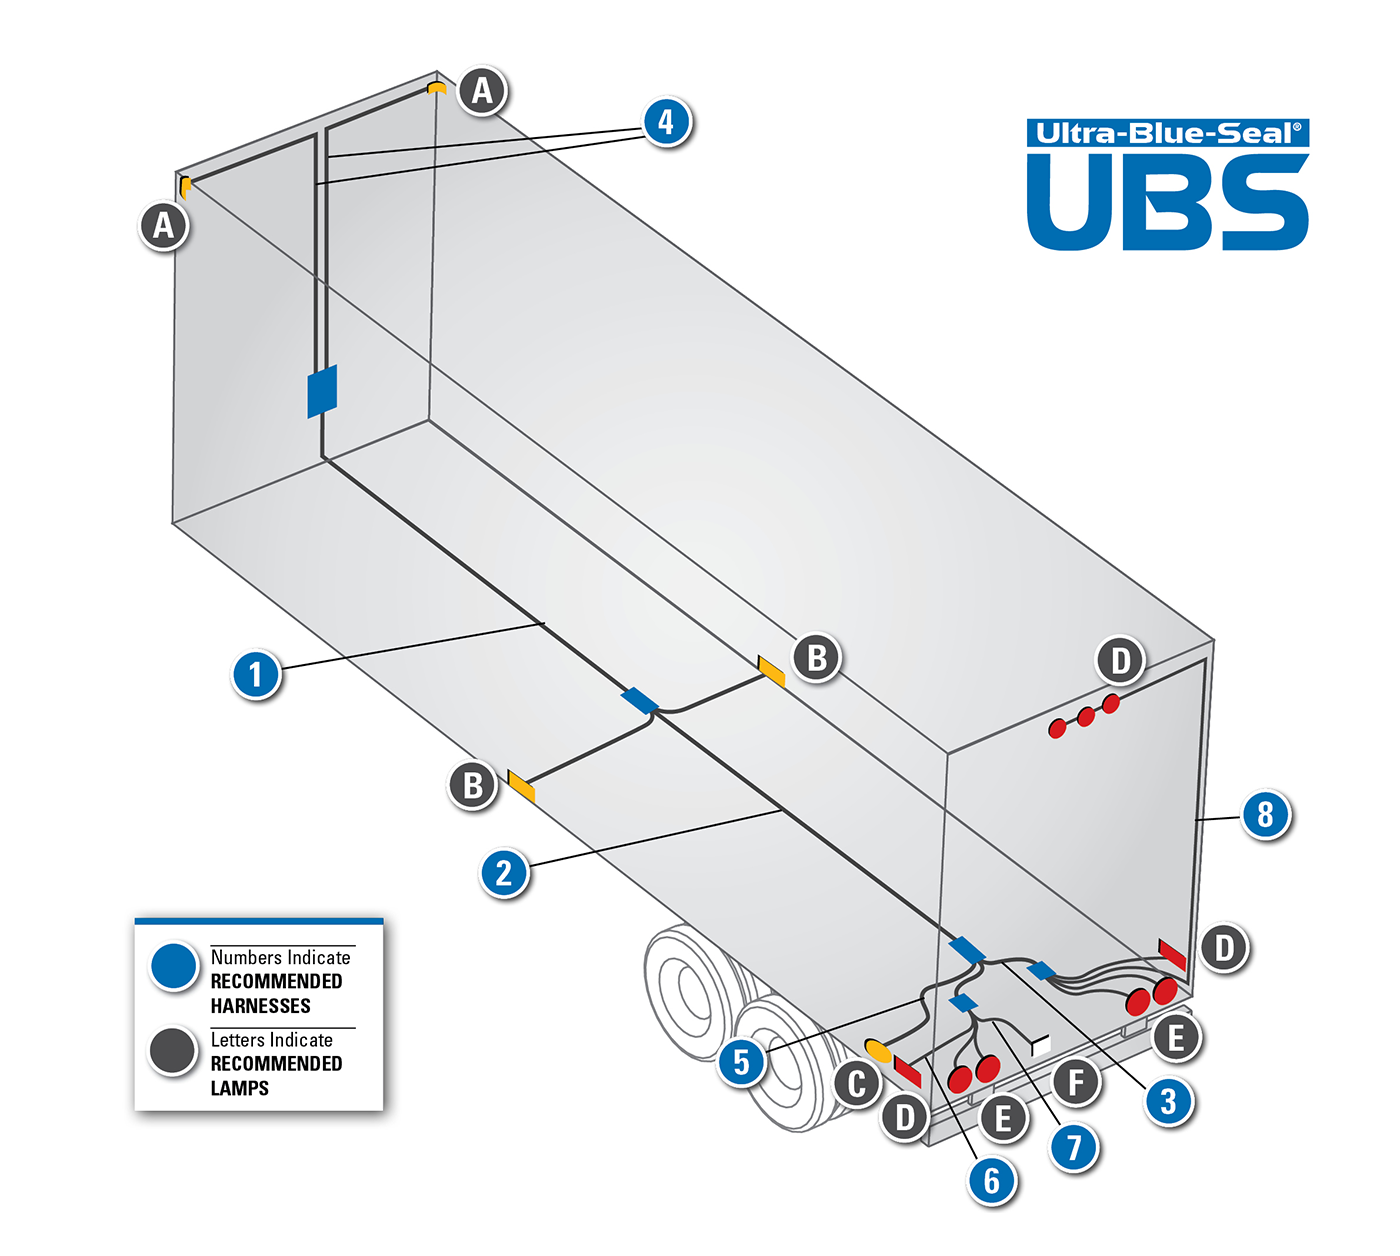 ULTRA-BLUE-SEAL® Wire Harness System | Grote Industries  Semi Trailer Lights Wiring Diagram    Grote Industries